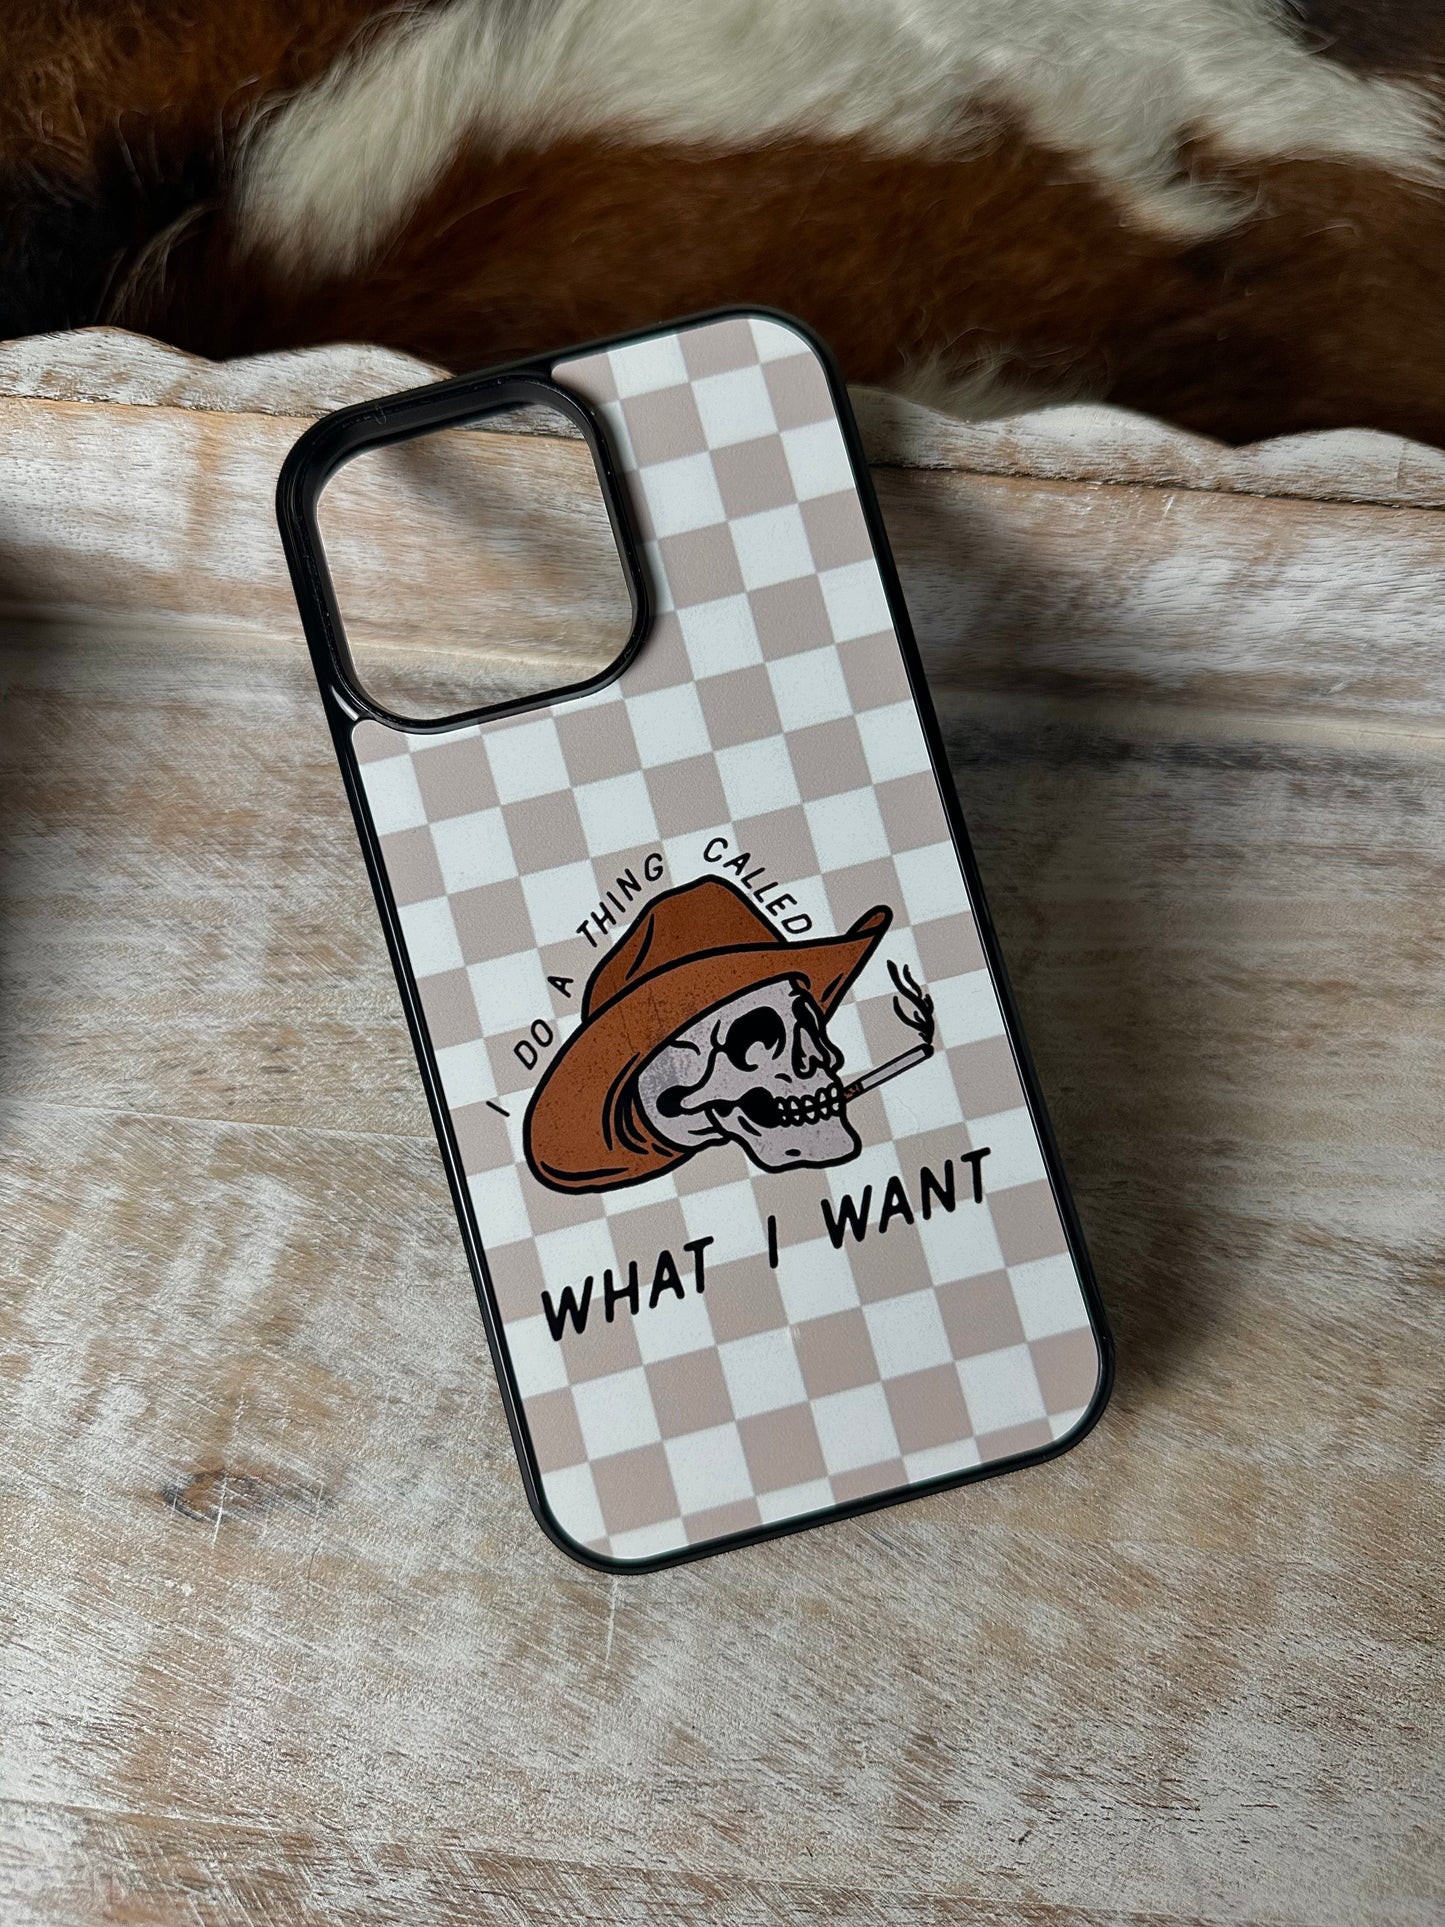 What I want phone case